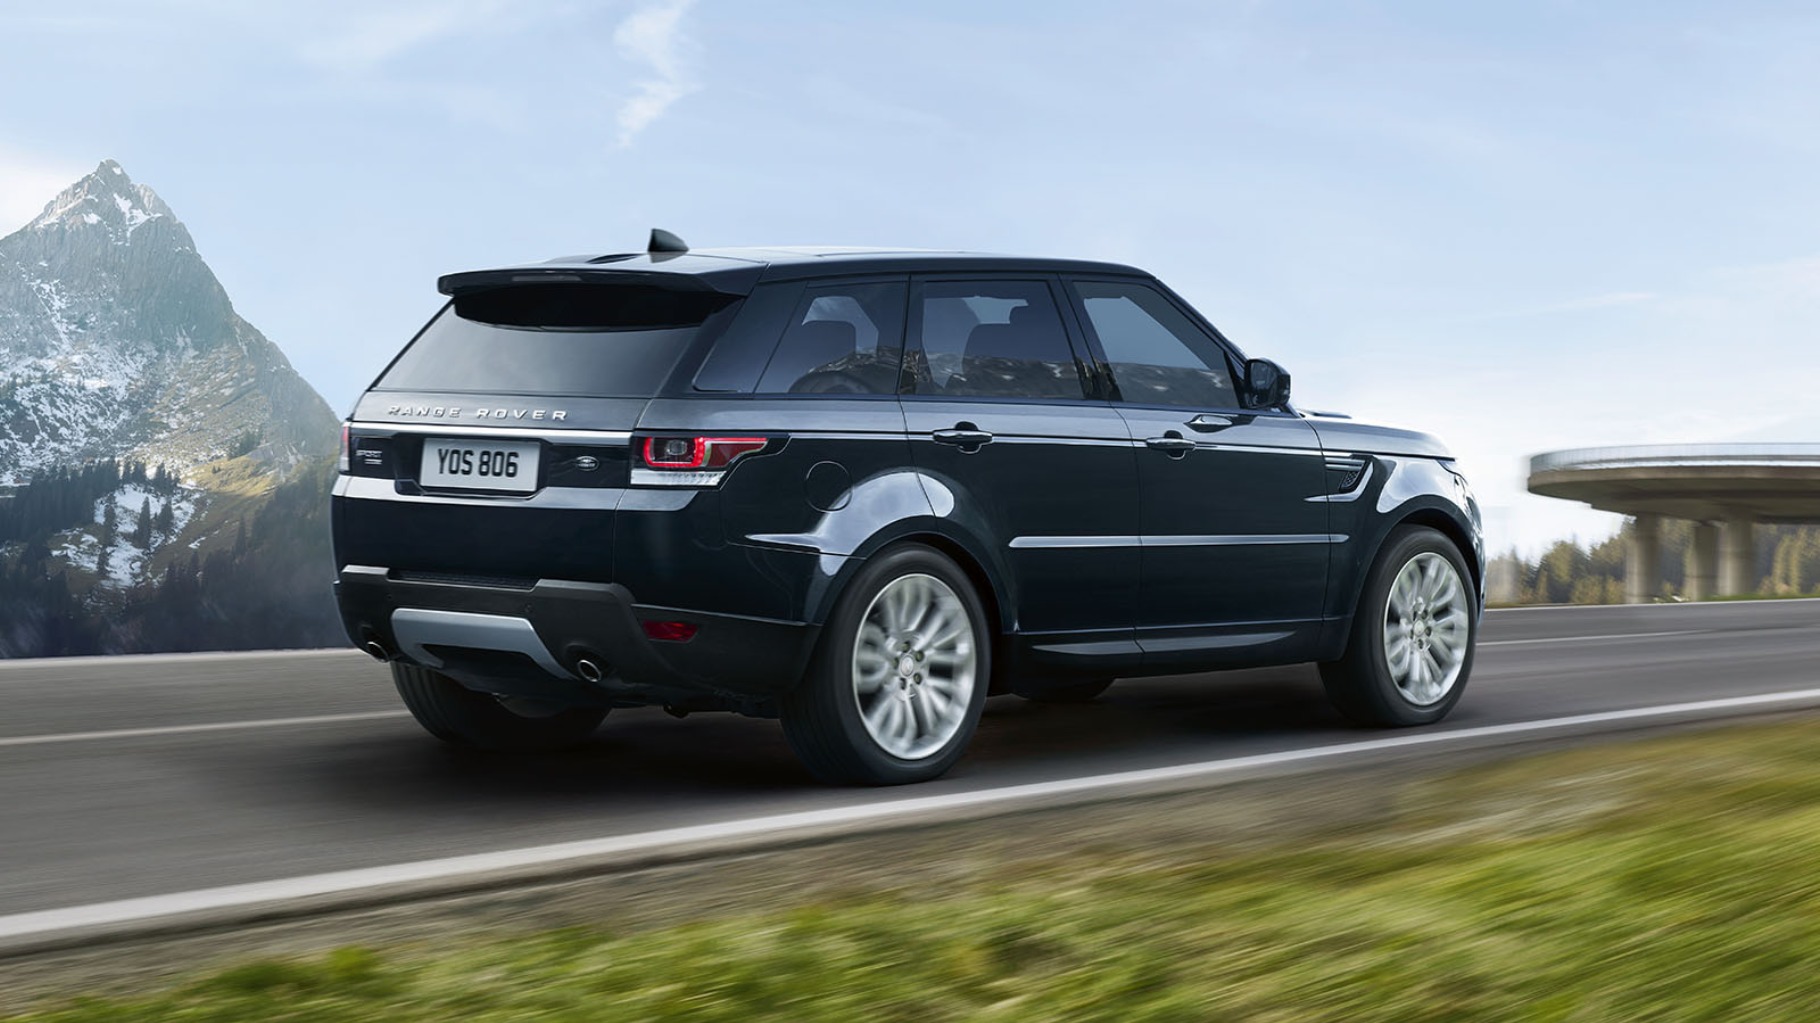 Explore the 2017 Land Rover Range Rover Sport with Land Rover Annapolis.